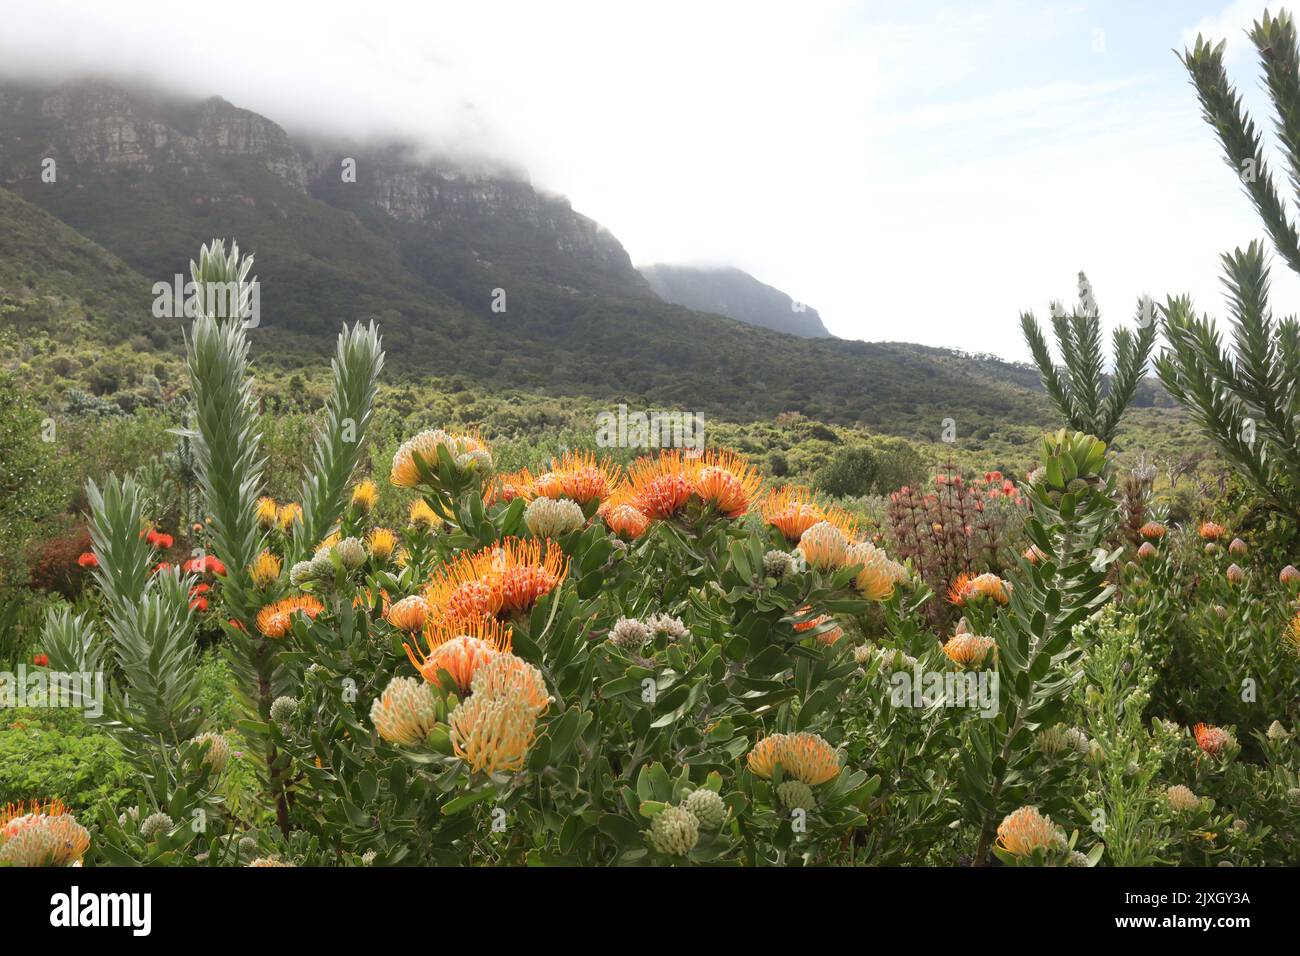 Field of pincushion proteas in the Kirstenbosch Botanical Gardens in Cape Town South Africa Stock Photo